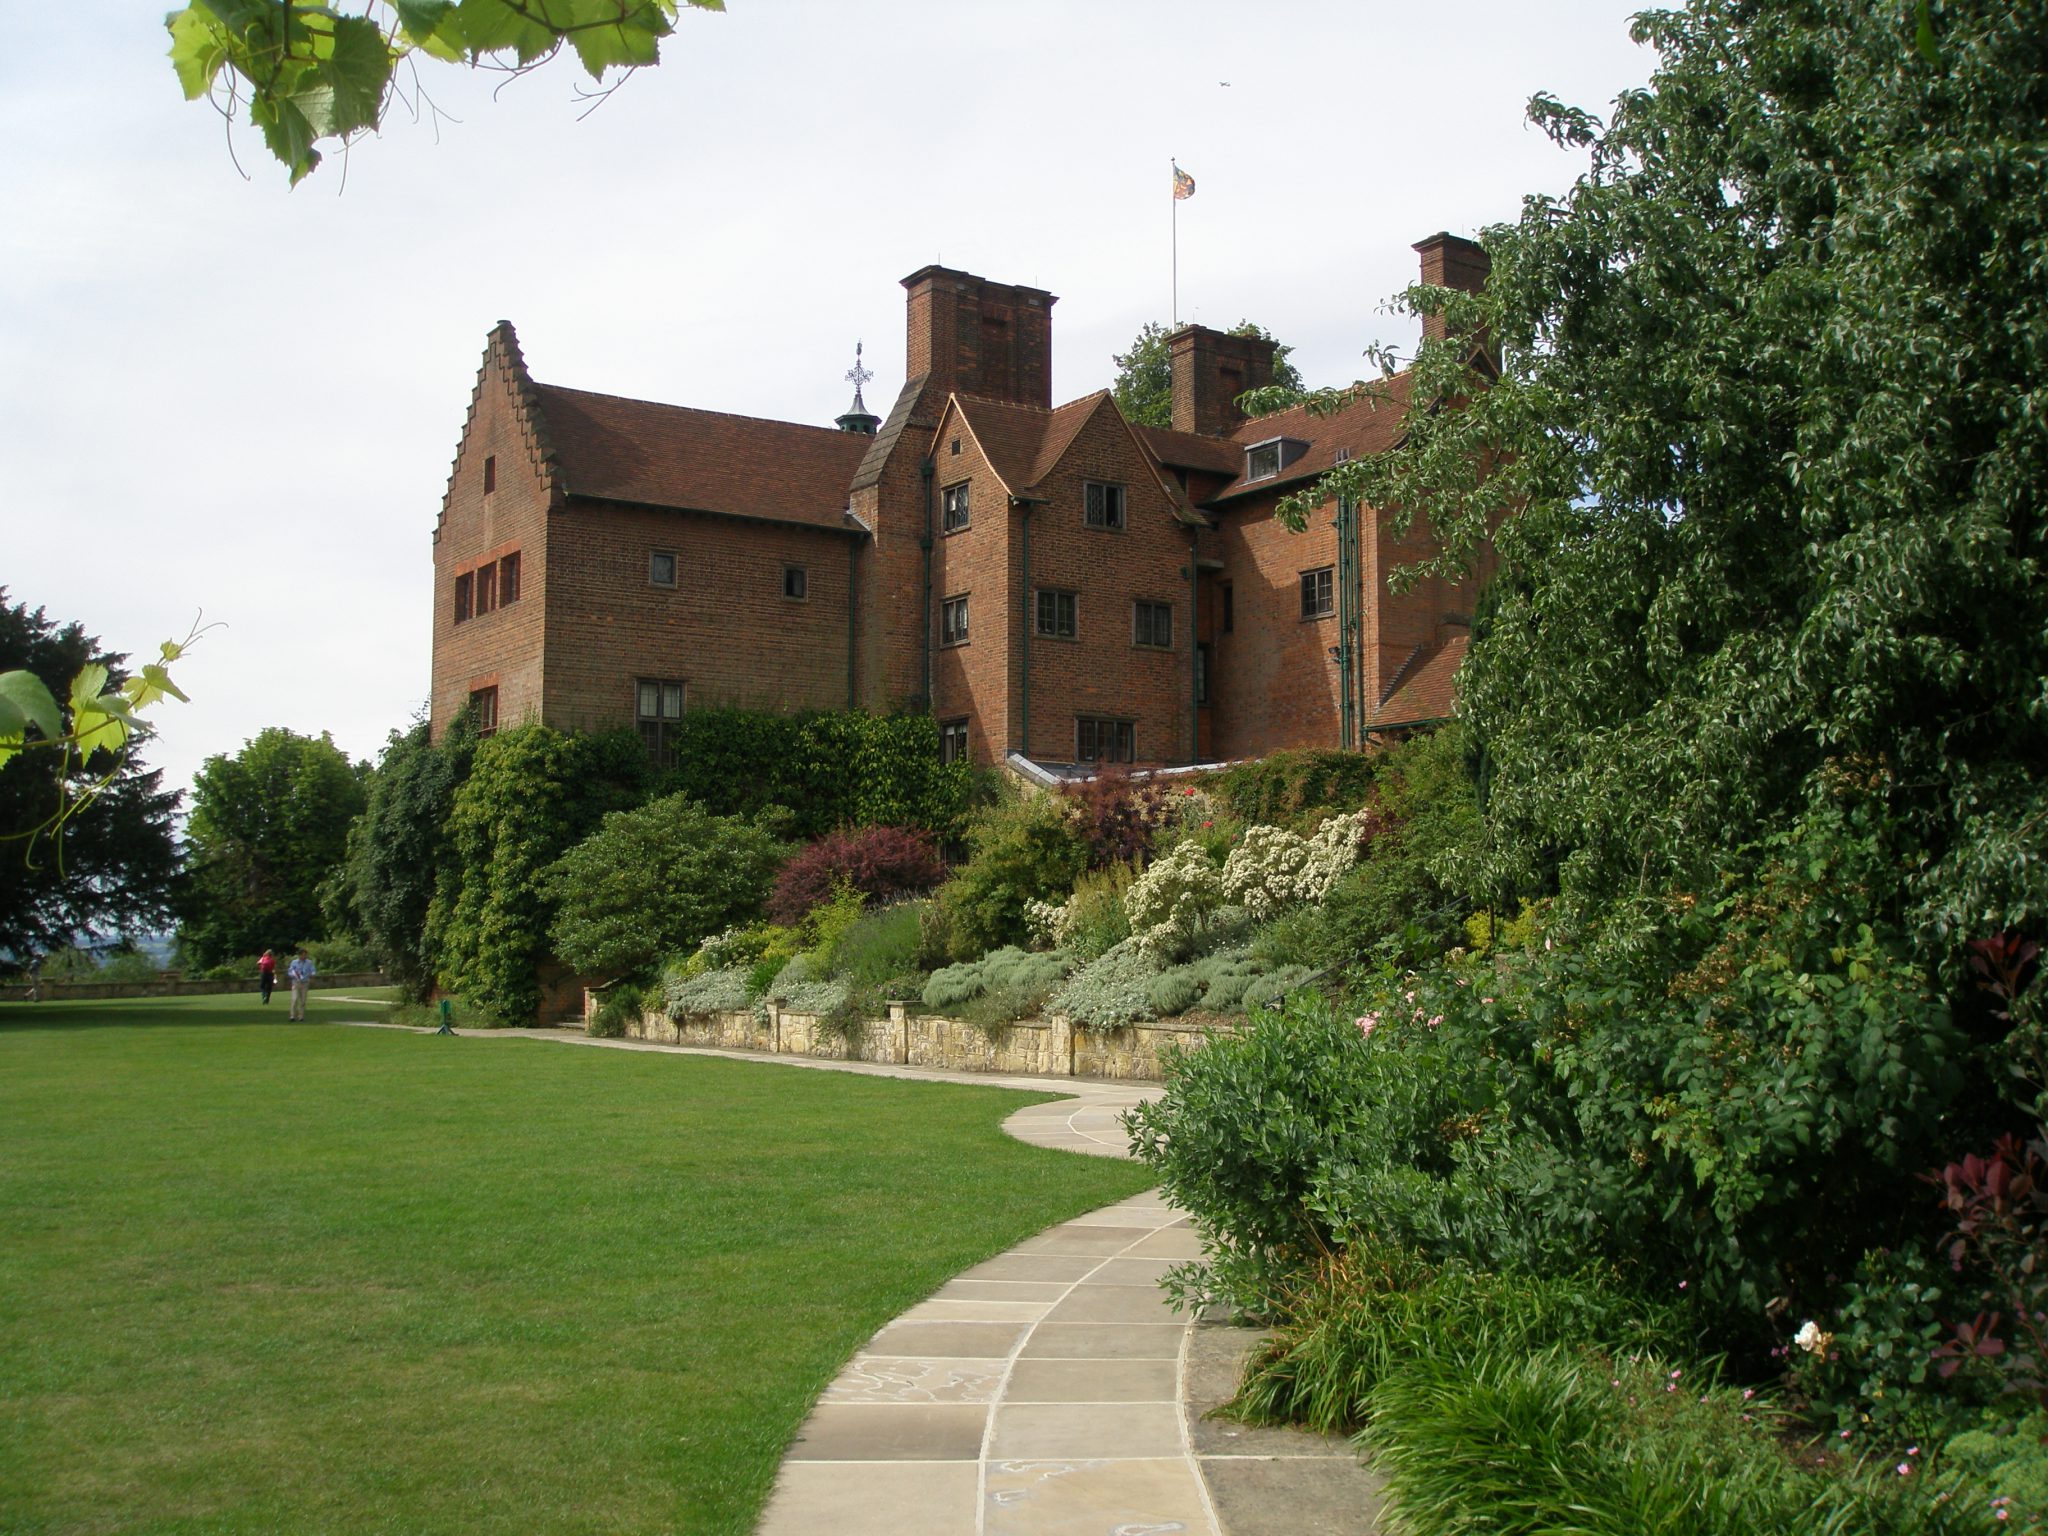 The view from the Terrace Lawn, up toward the back of the House. After Churchill bought Chartwell, his architect Philip Tilden built a new wing, which extended out into the garden. The 3 stories of this addition contained a Dining Room on the garden-level basement, a Drawing Room on the ground floor, and a barrel-vaulted bedroom for Clementine on the first floor. Ever-dramatic, Churchill called his addition "my promontory."